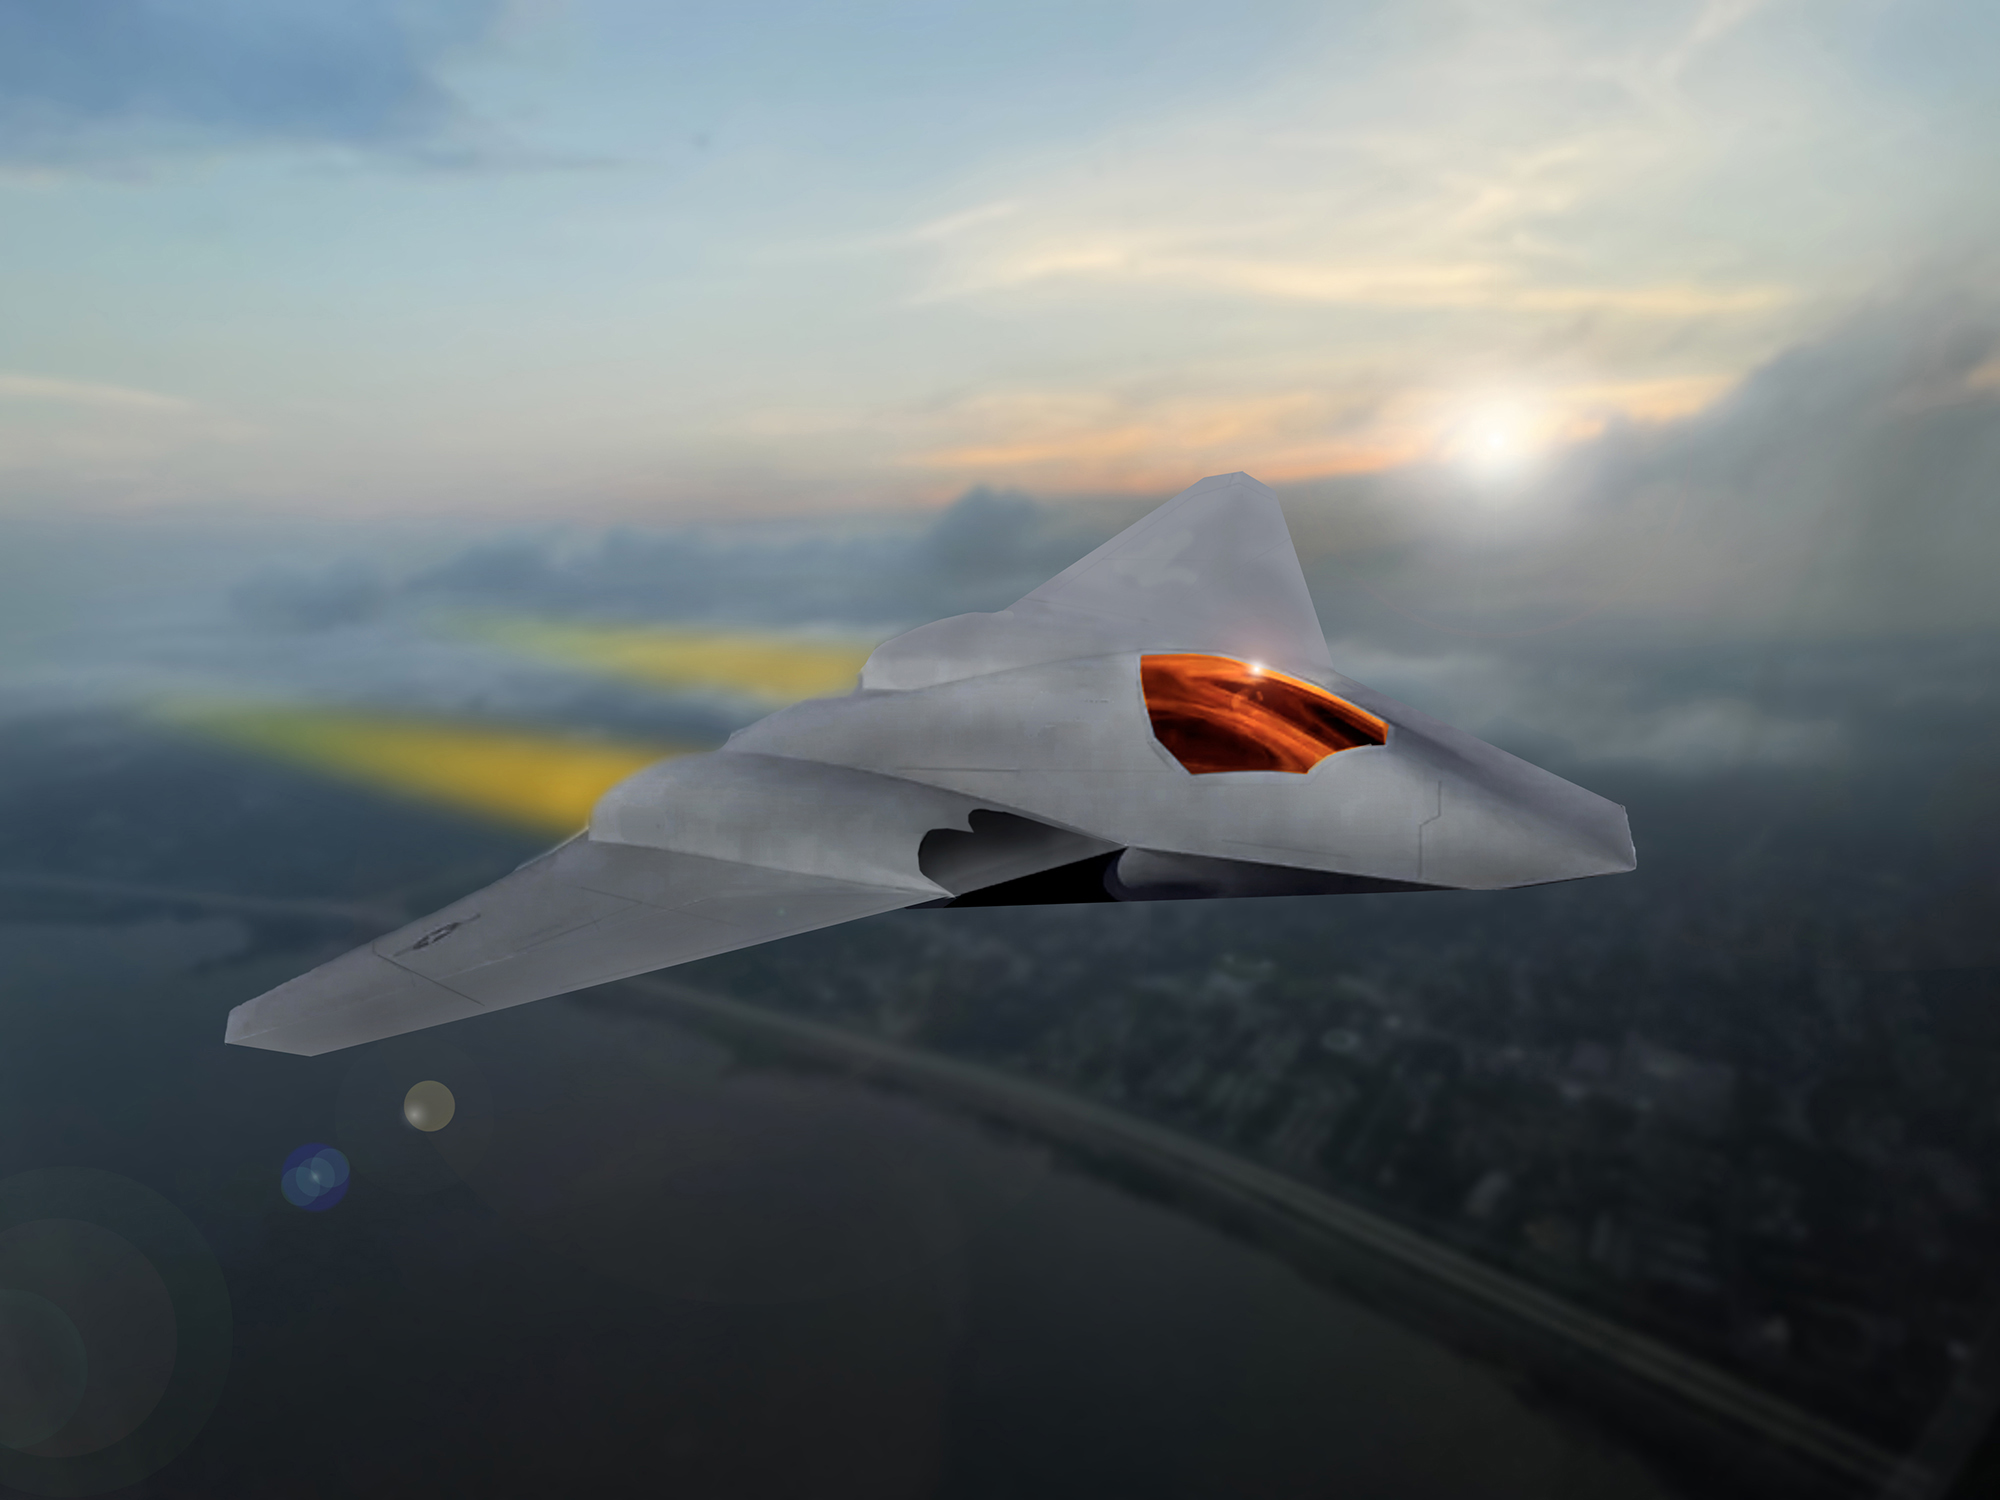 USAF Plans $28.48 Billion over 5 Years to Develop New Advanced Fighters, Drone Escorts